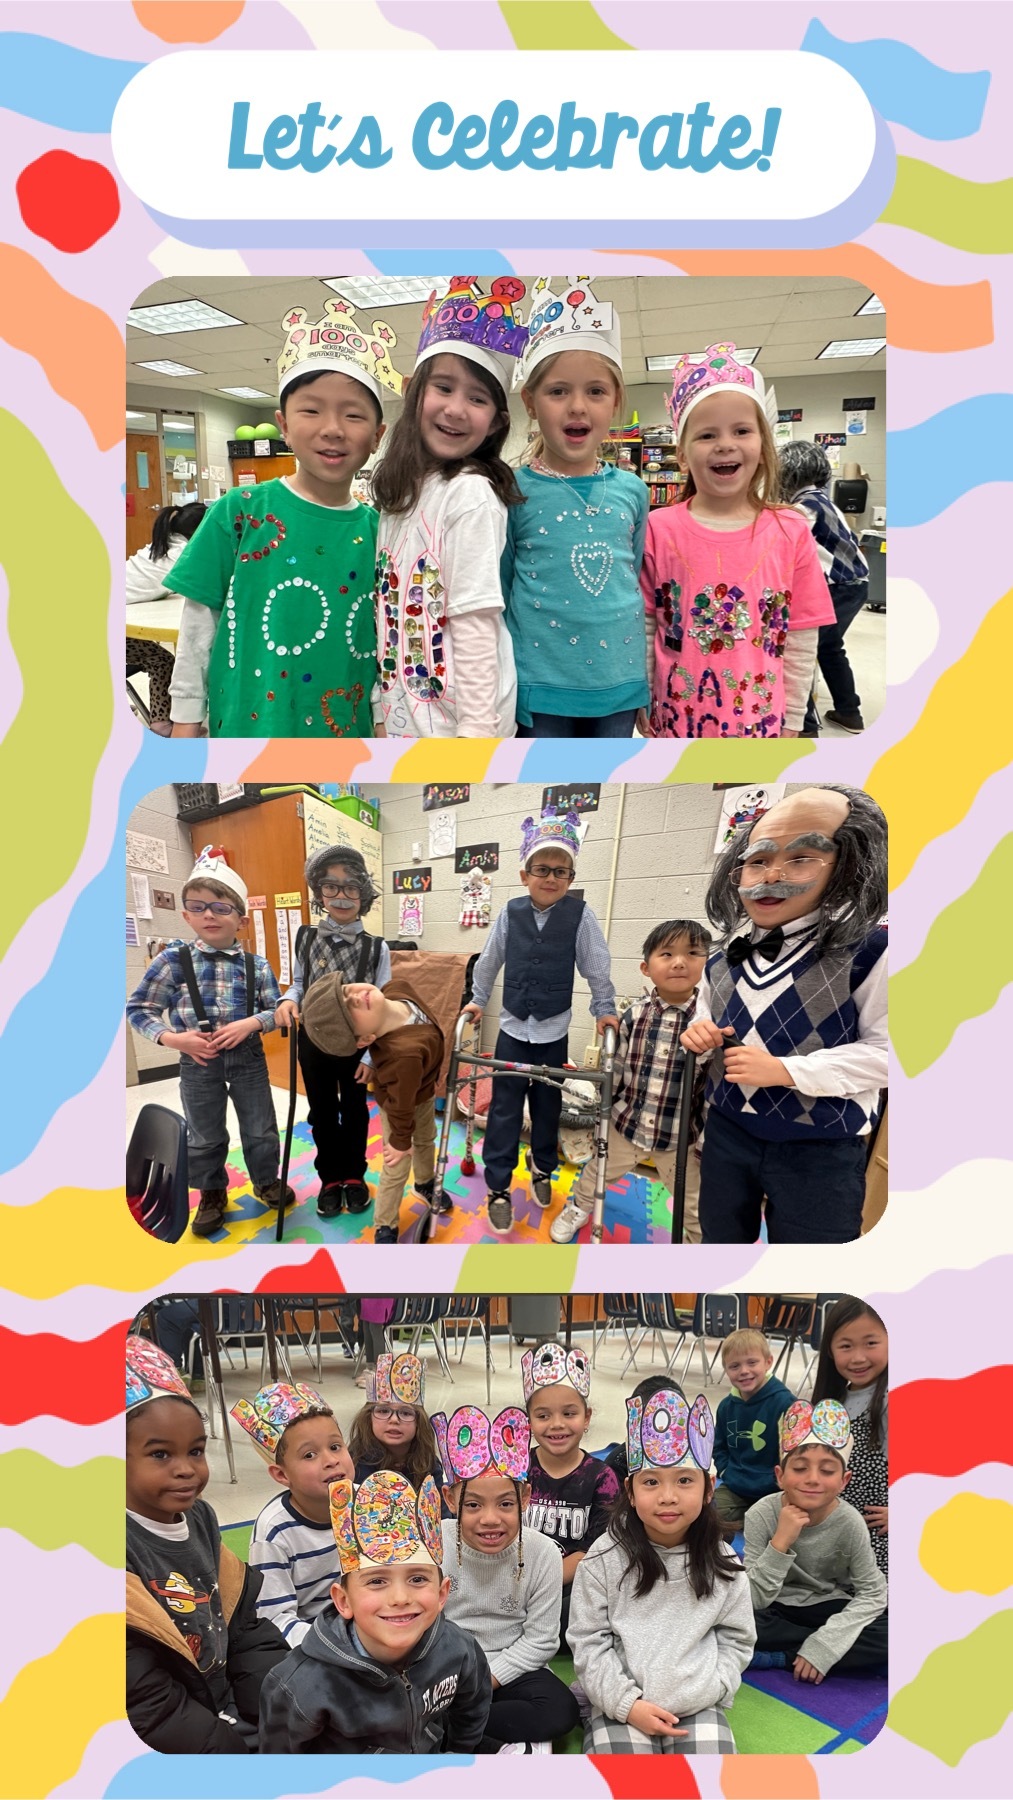 Students  had fun celebrating the 100th day of school.